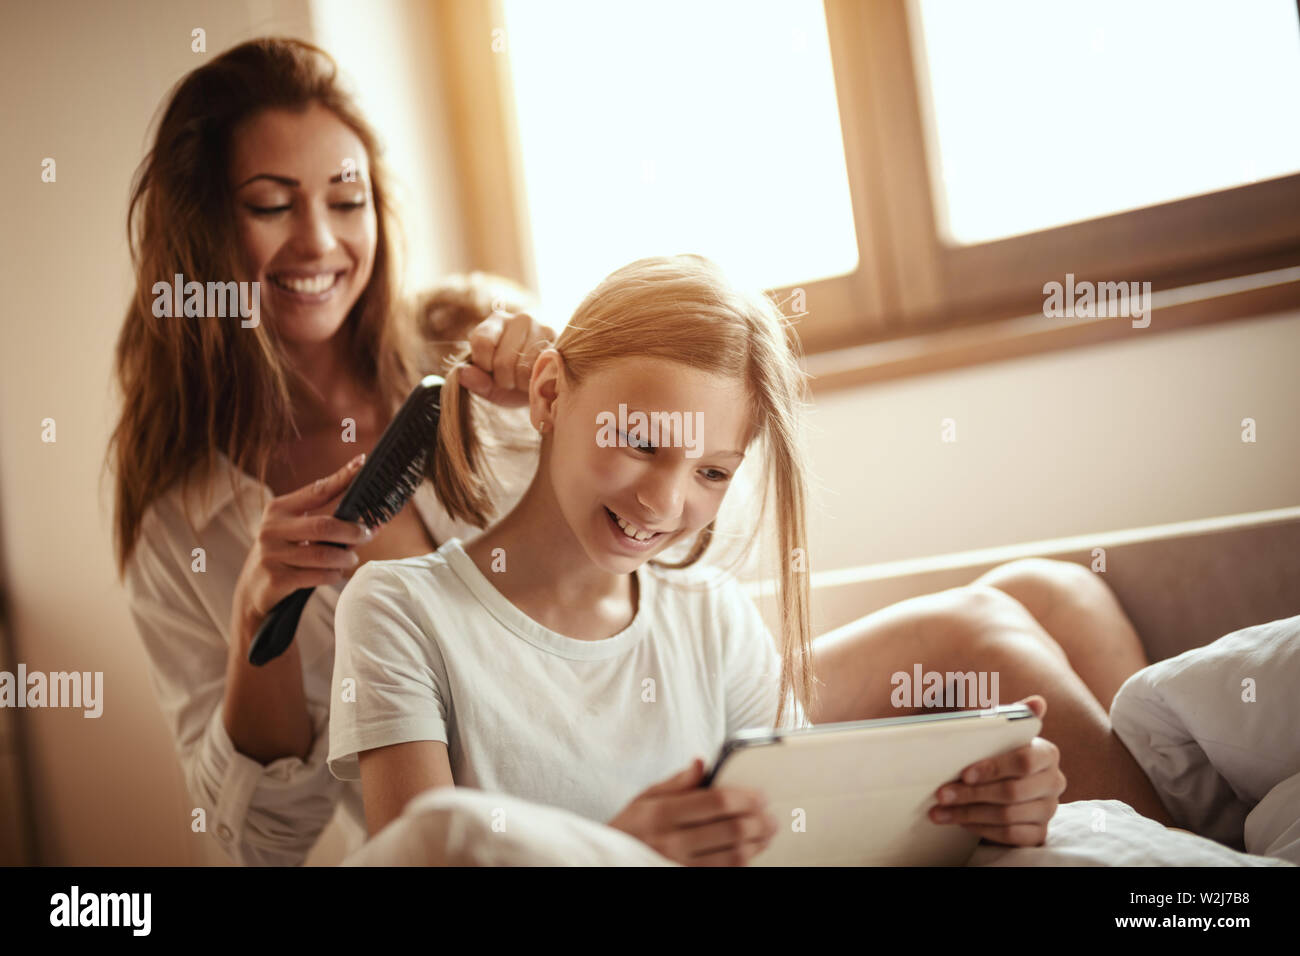 Young smiling happy mother is combing her little daughter's hair on bed while the girl is looking at the digital tablet. Stock Photo